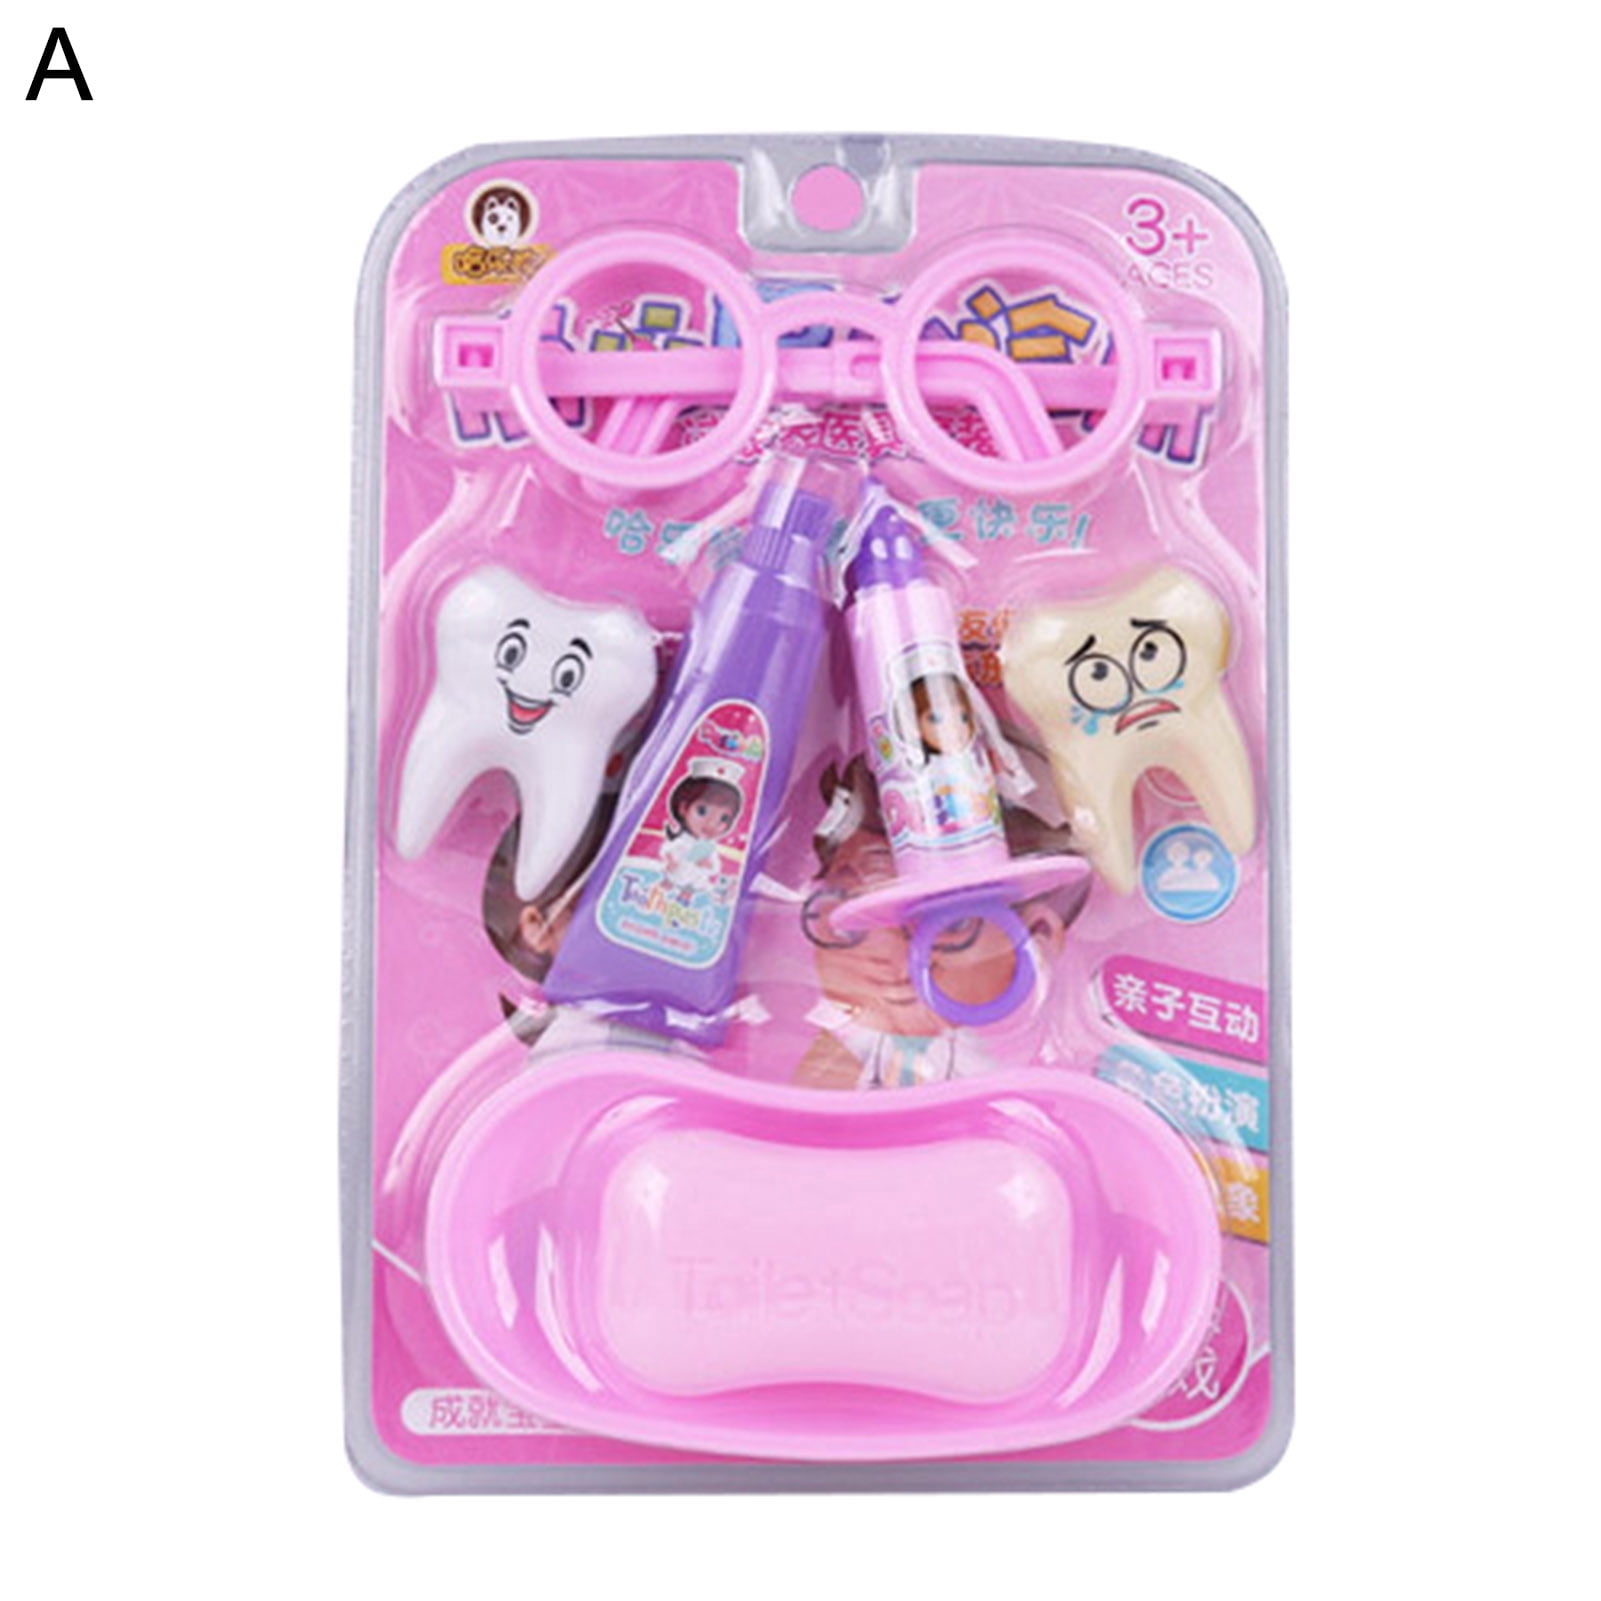 MyBeauty 1 Set Medical Toys Kit Simulation Role Play Colorful Doctor Nurse  Toy Children Gift for Cosplay 